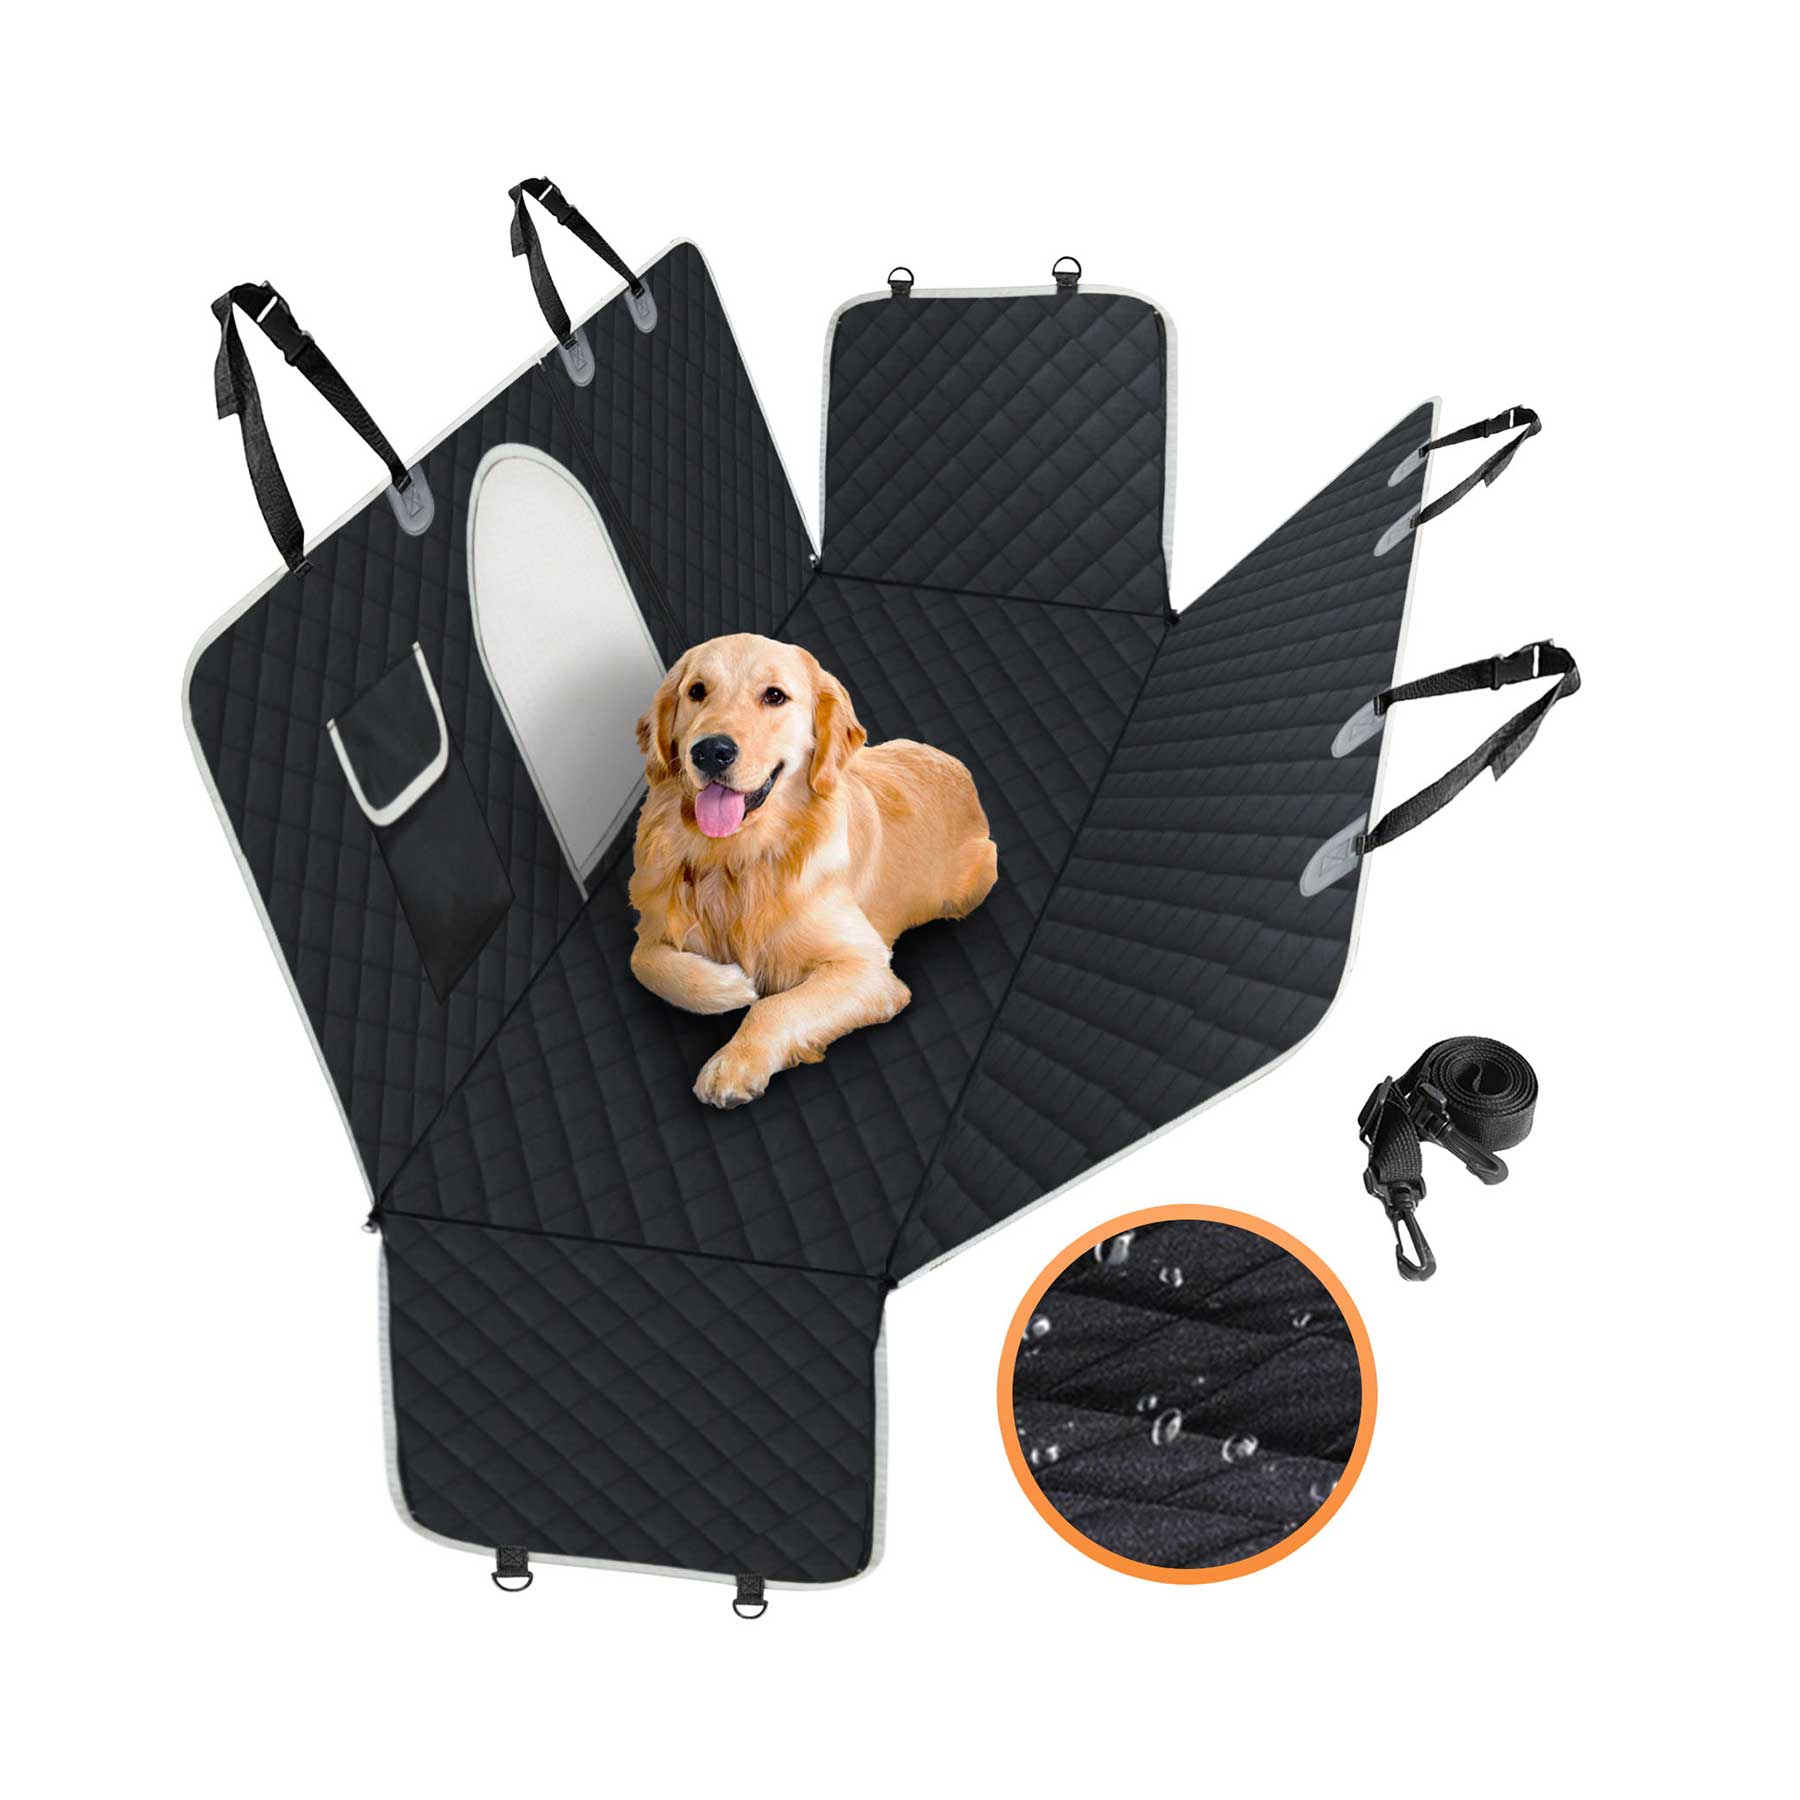 PetsN'all Durable Dog Car Seat Cover to Protect from Scratches, Dirt, Hair and Other Messes, Easy to Clean, 100% Waterproof, Washable, Nonslip, with Mesh Window for Cars Trucks and SUVs 54WX58L Black